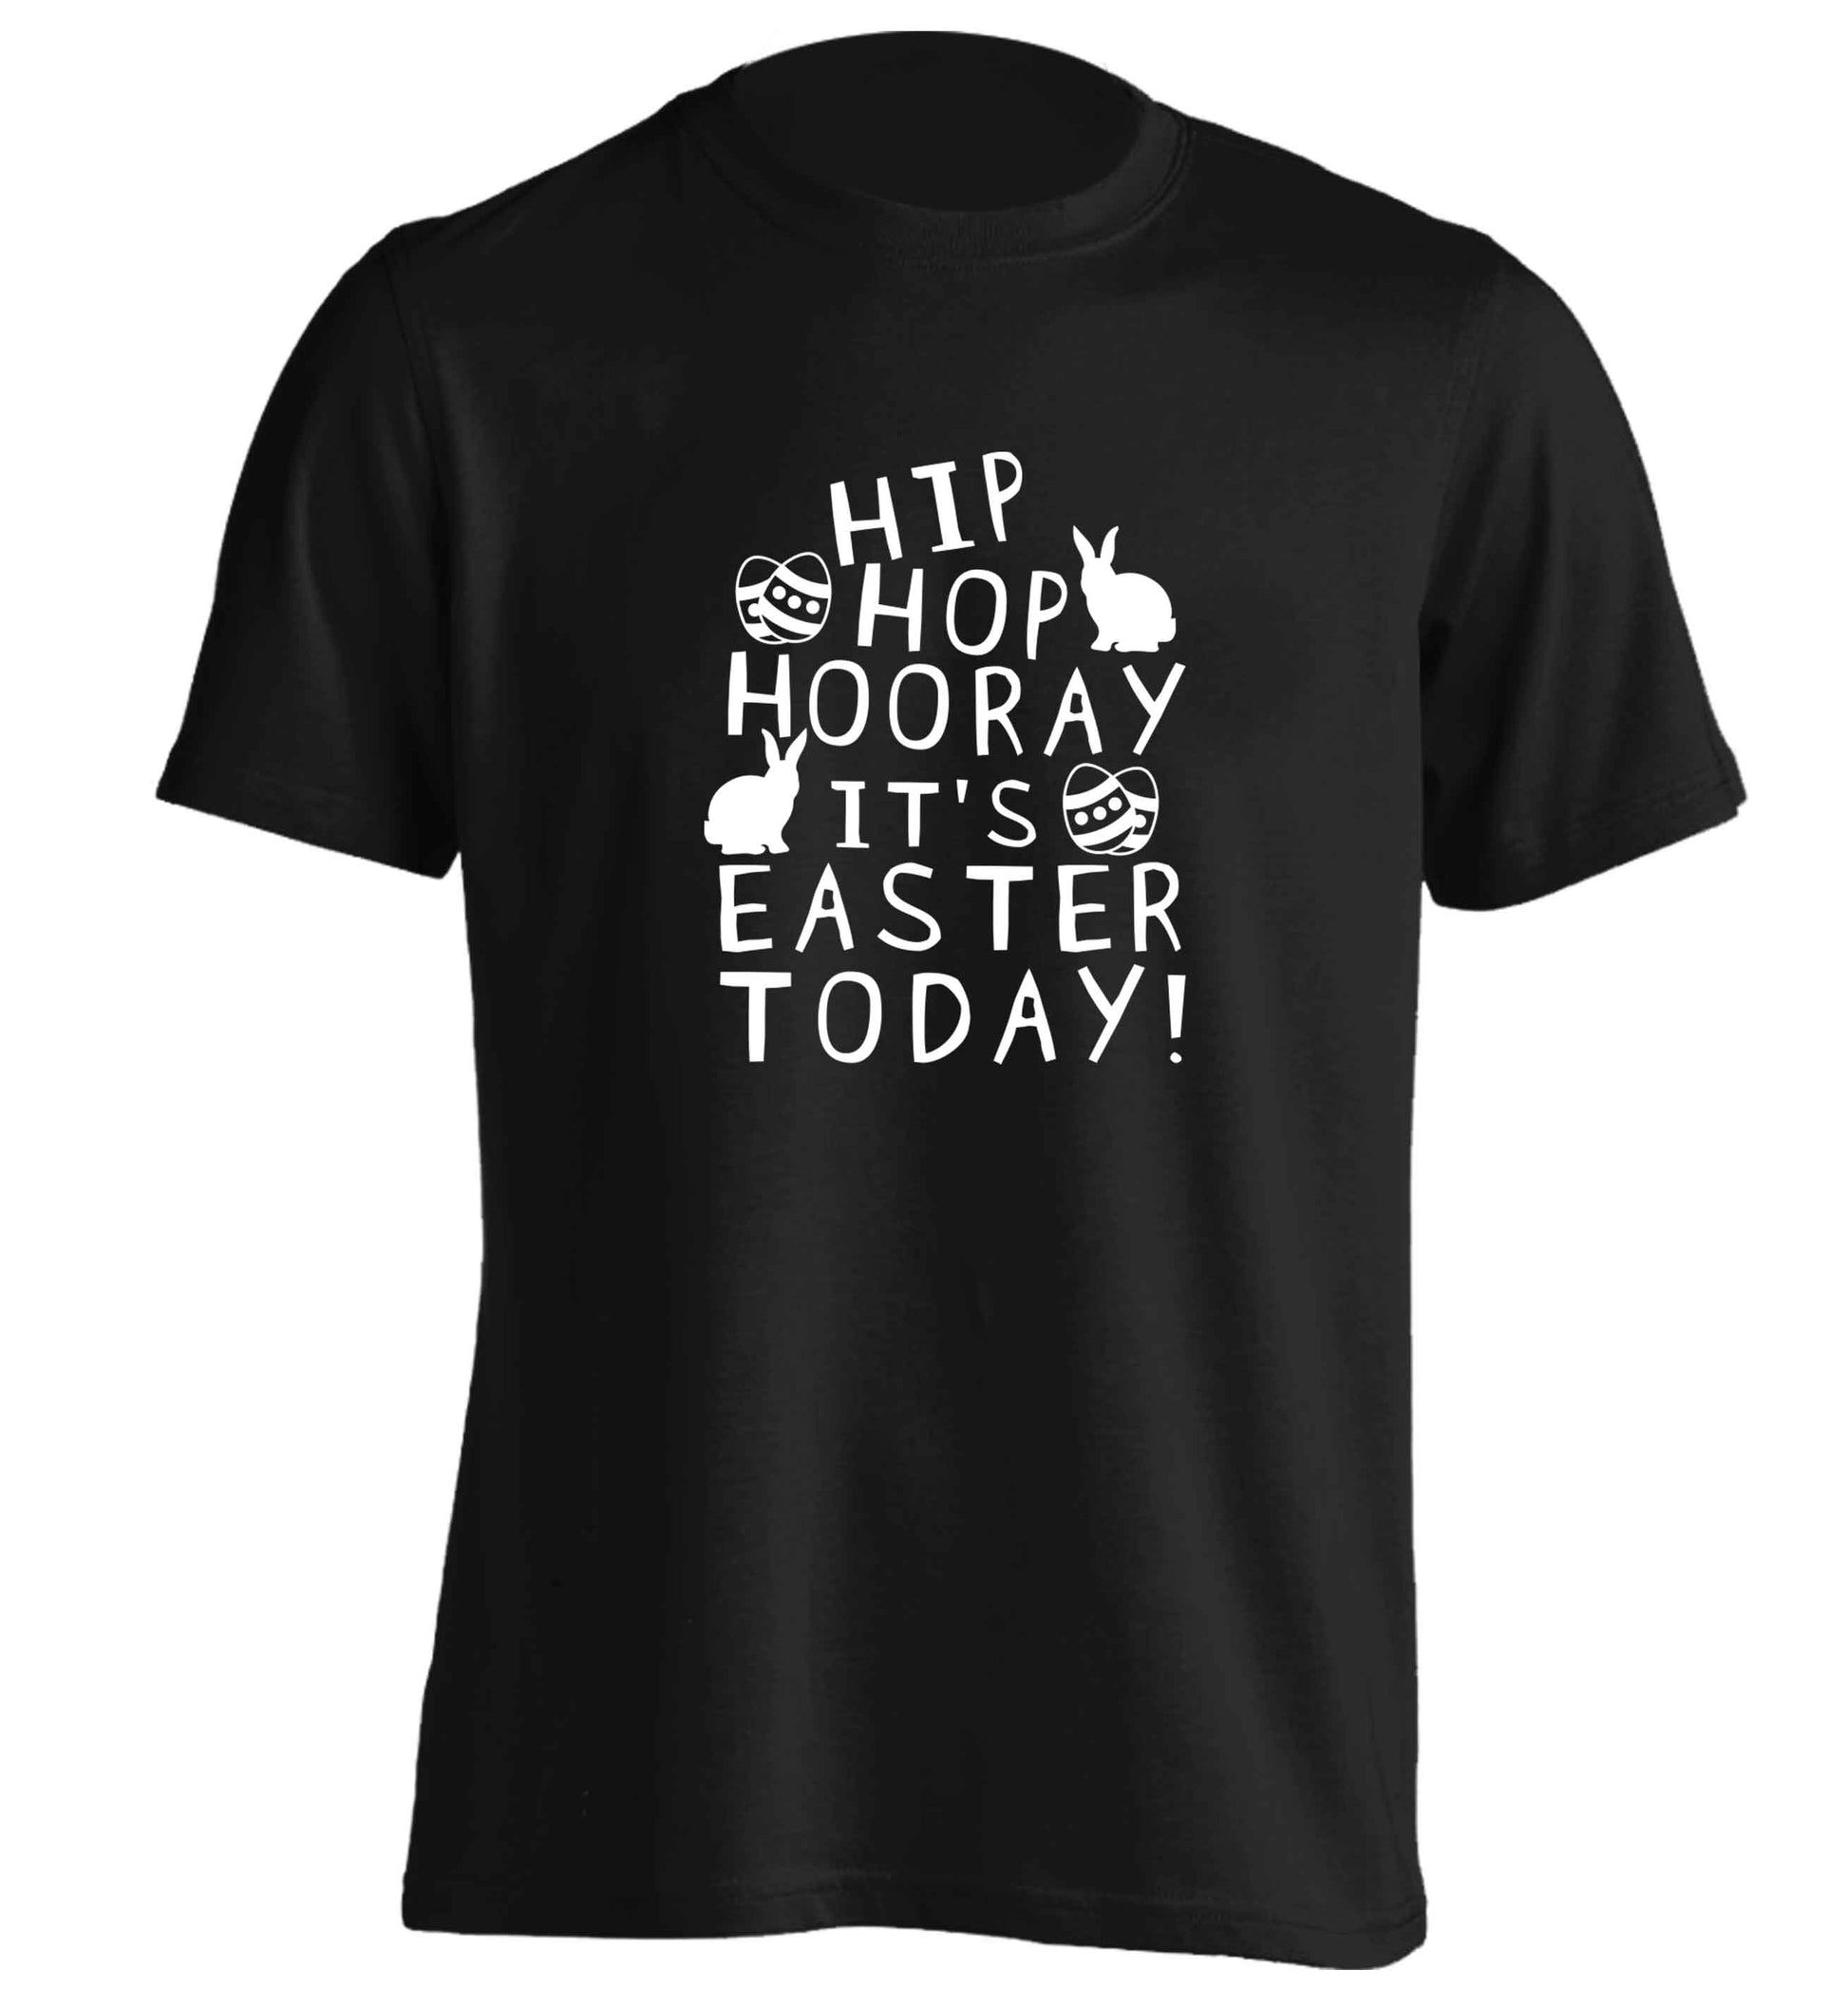 Hip hip hooray it's Easter today! adults unisex black Tshirt 2XL